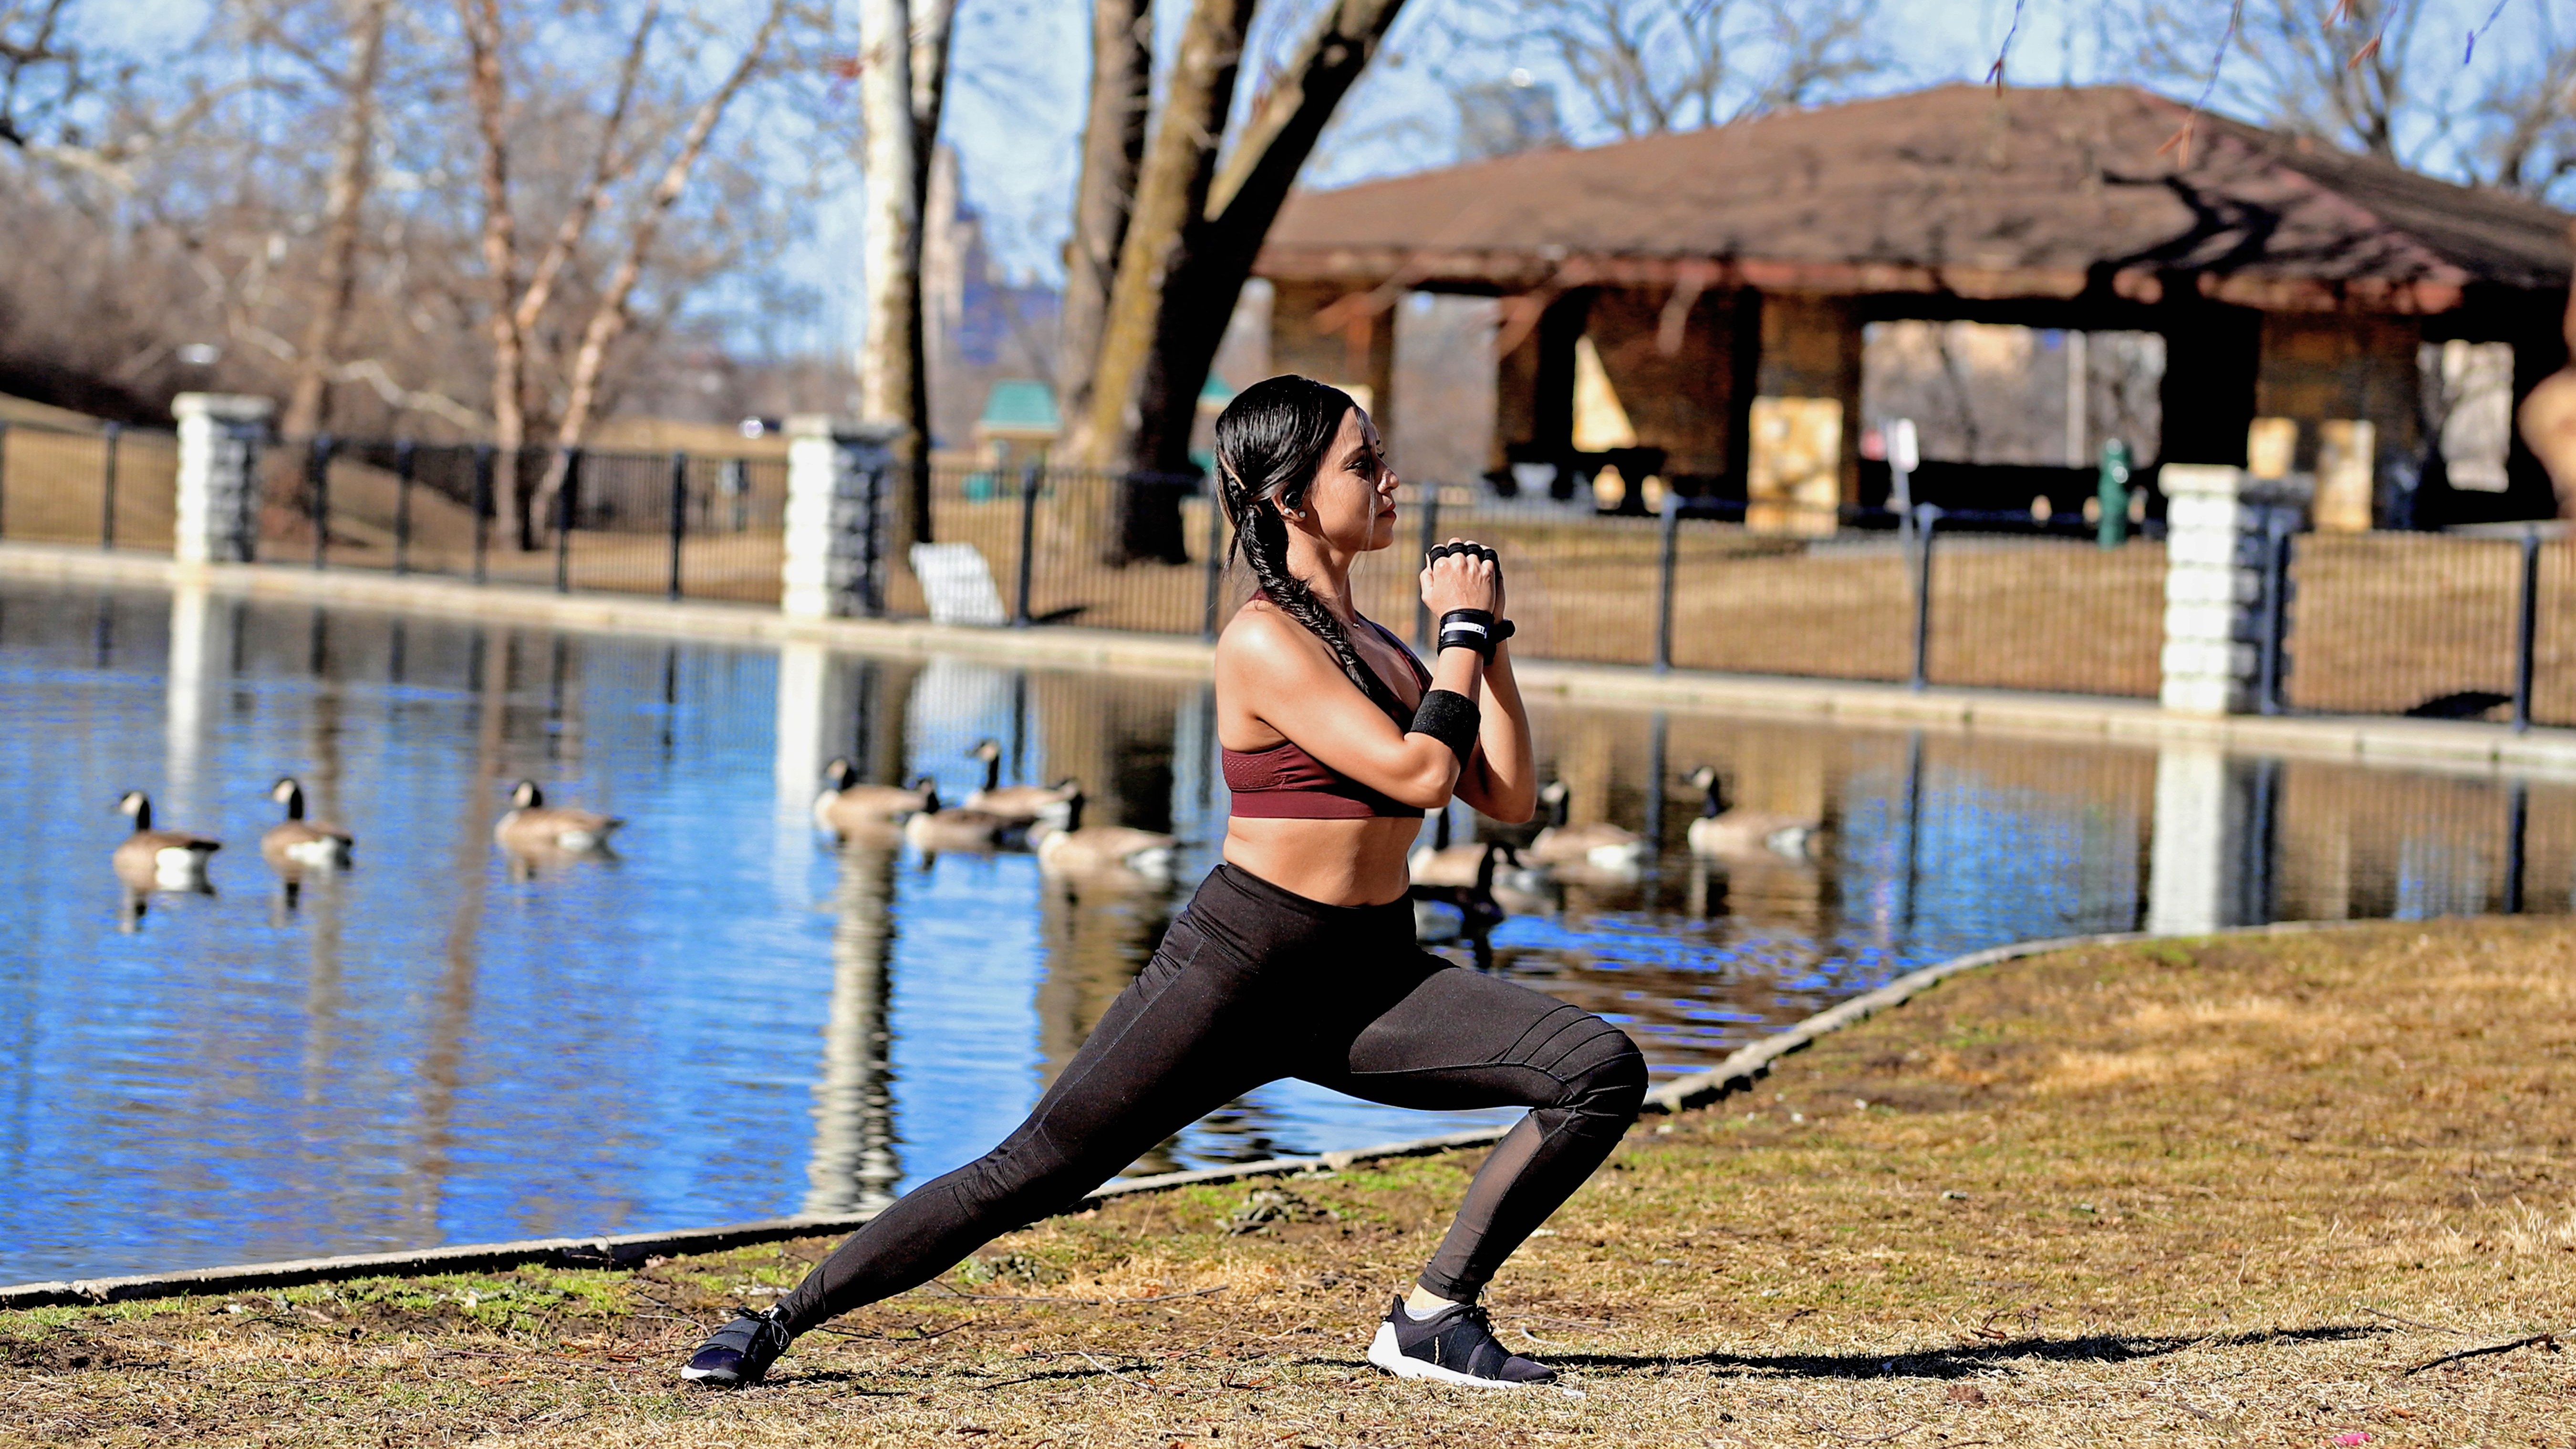 Girl exercising infront of the pond with ducks